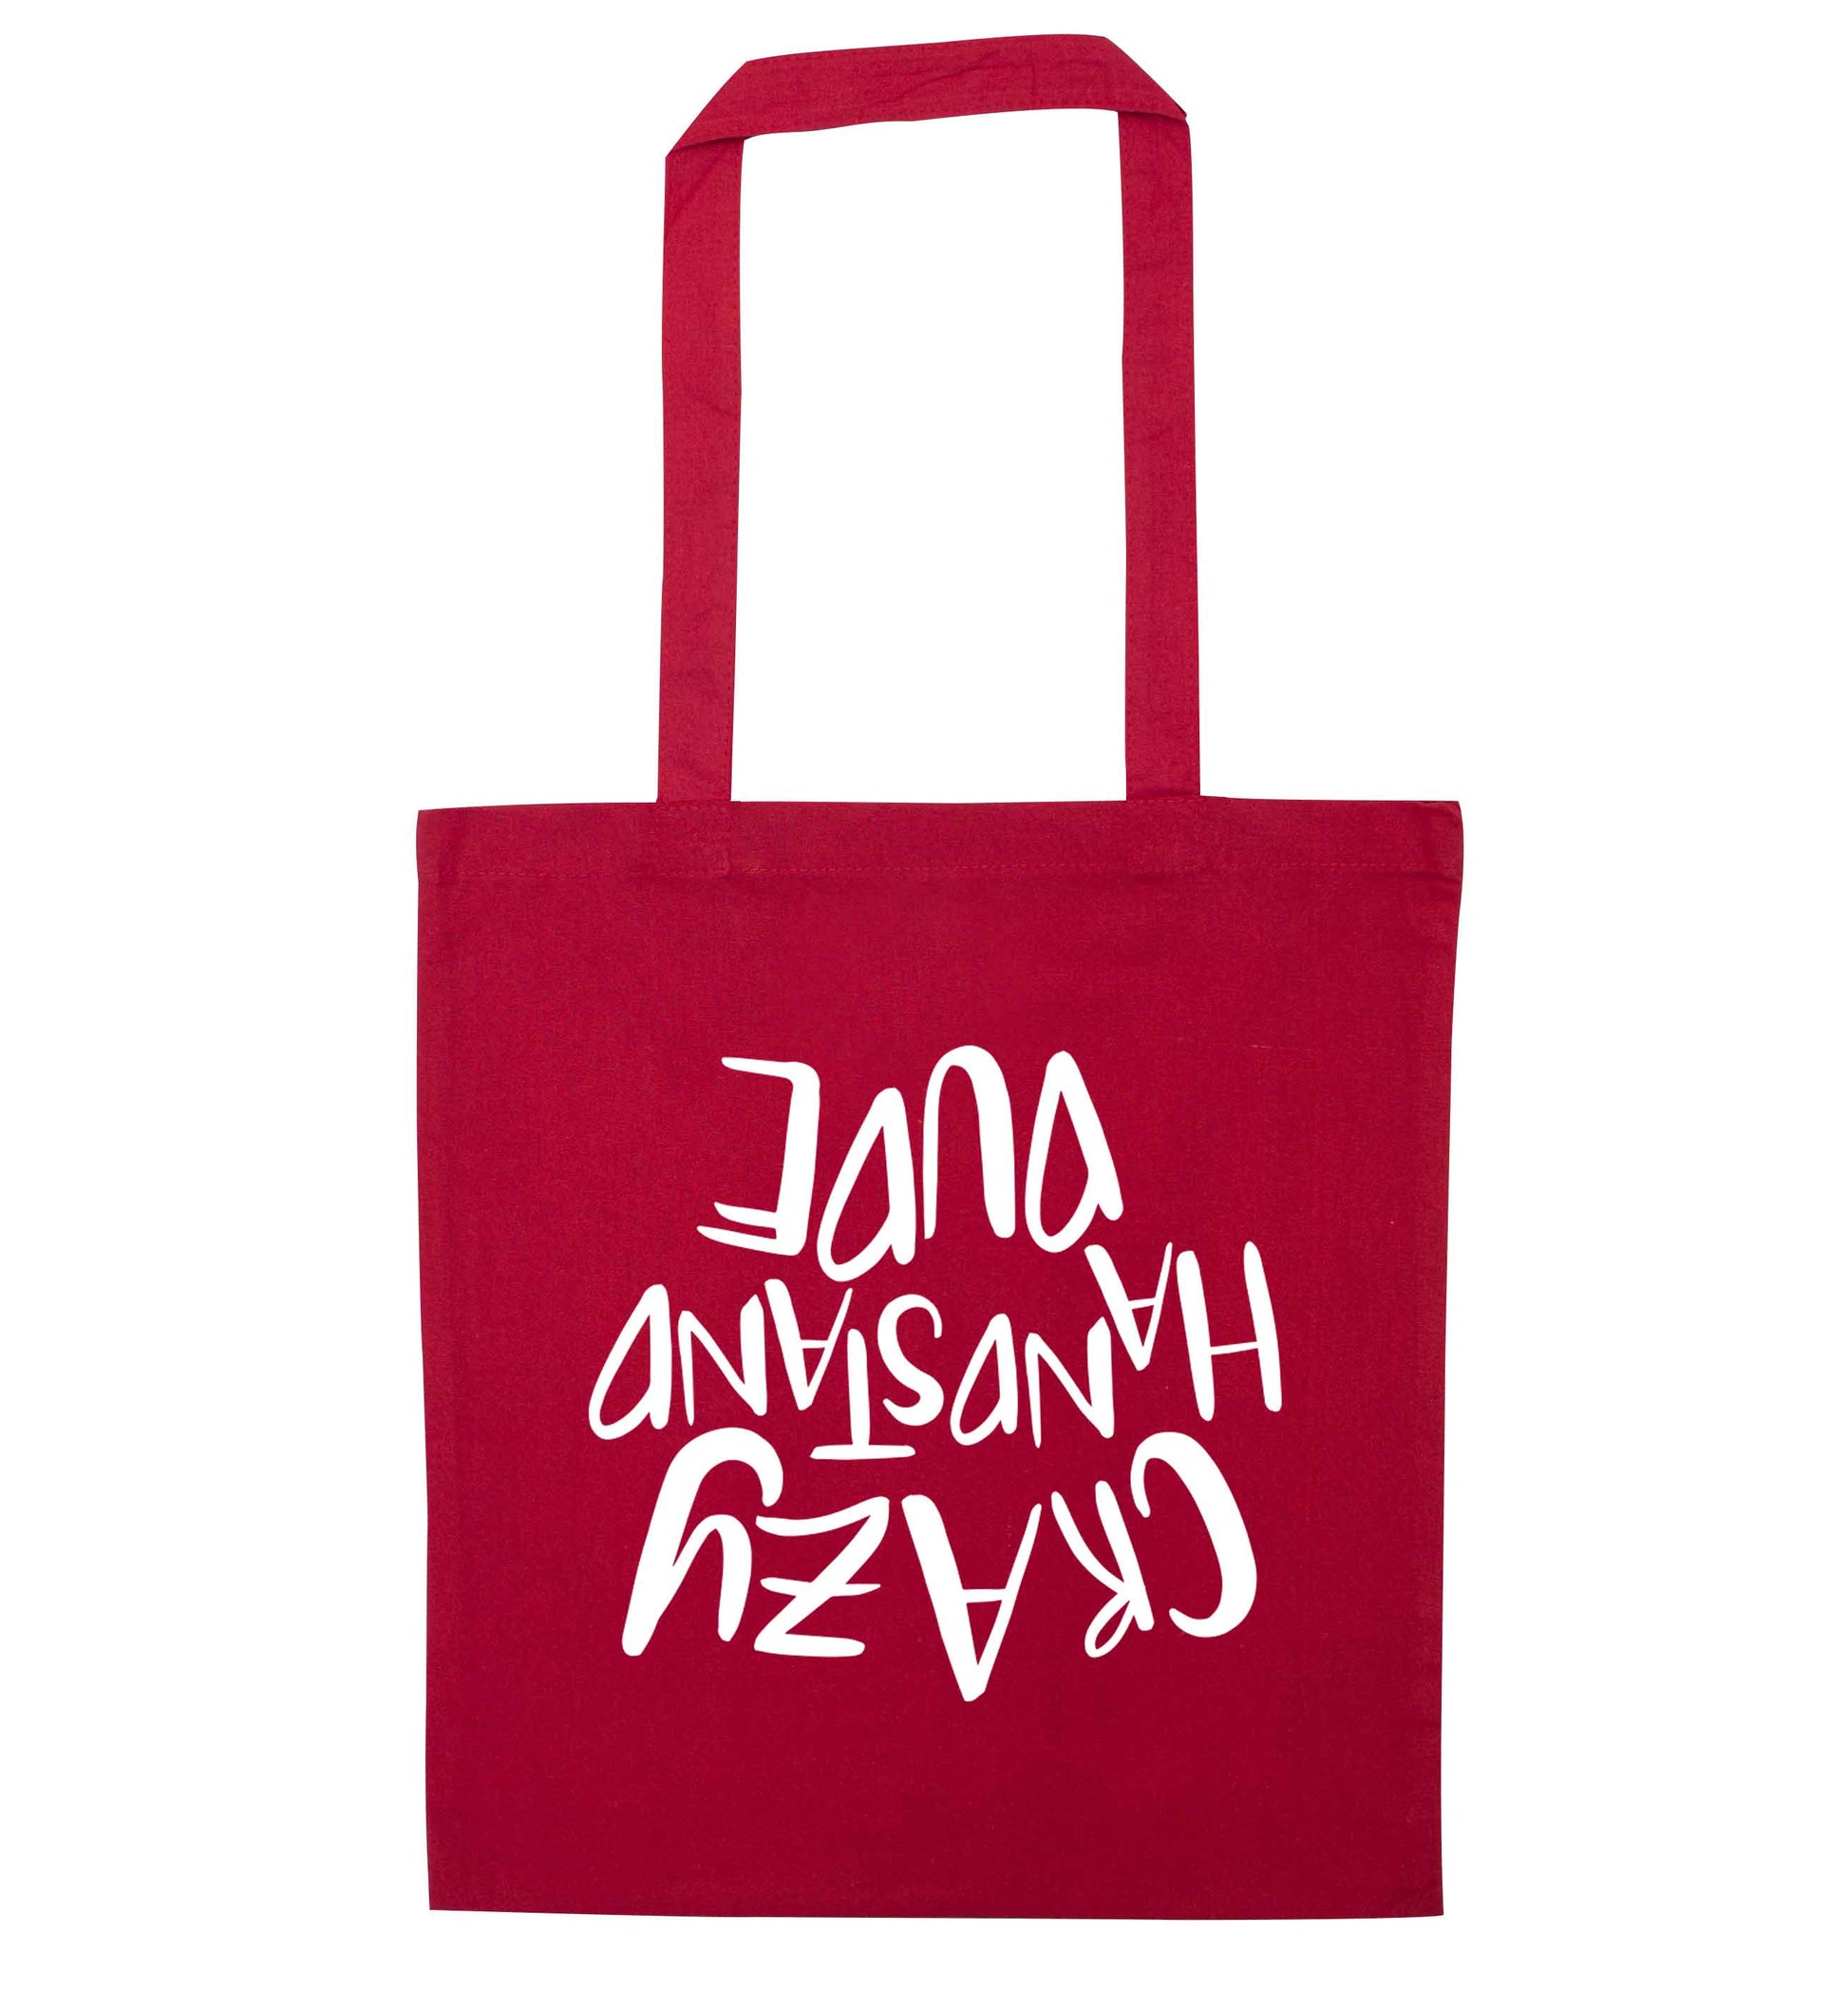 Crazy handstand dude red tote bag